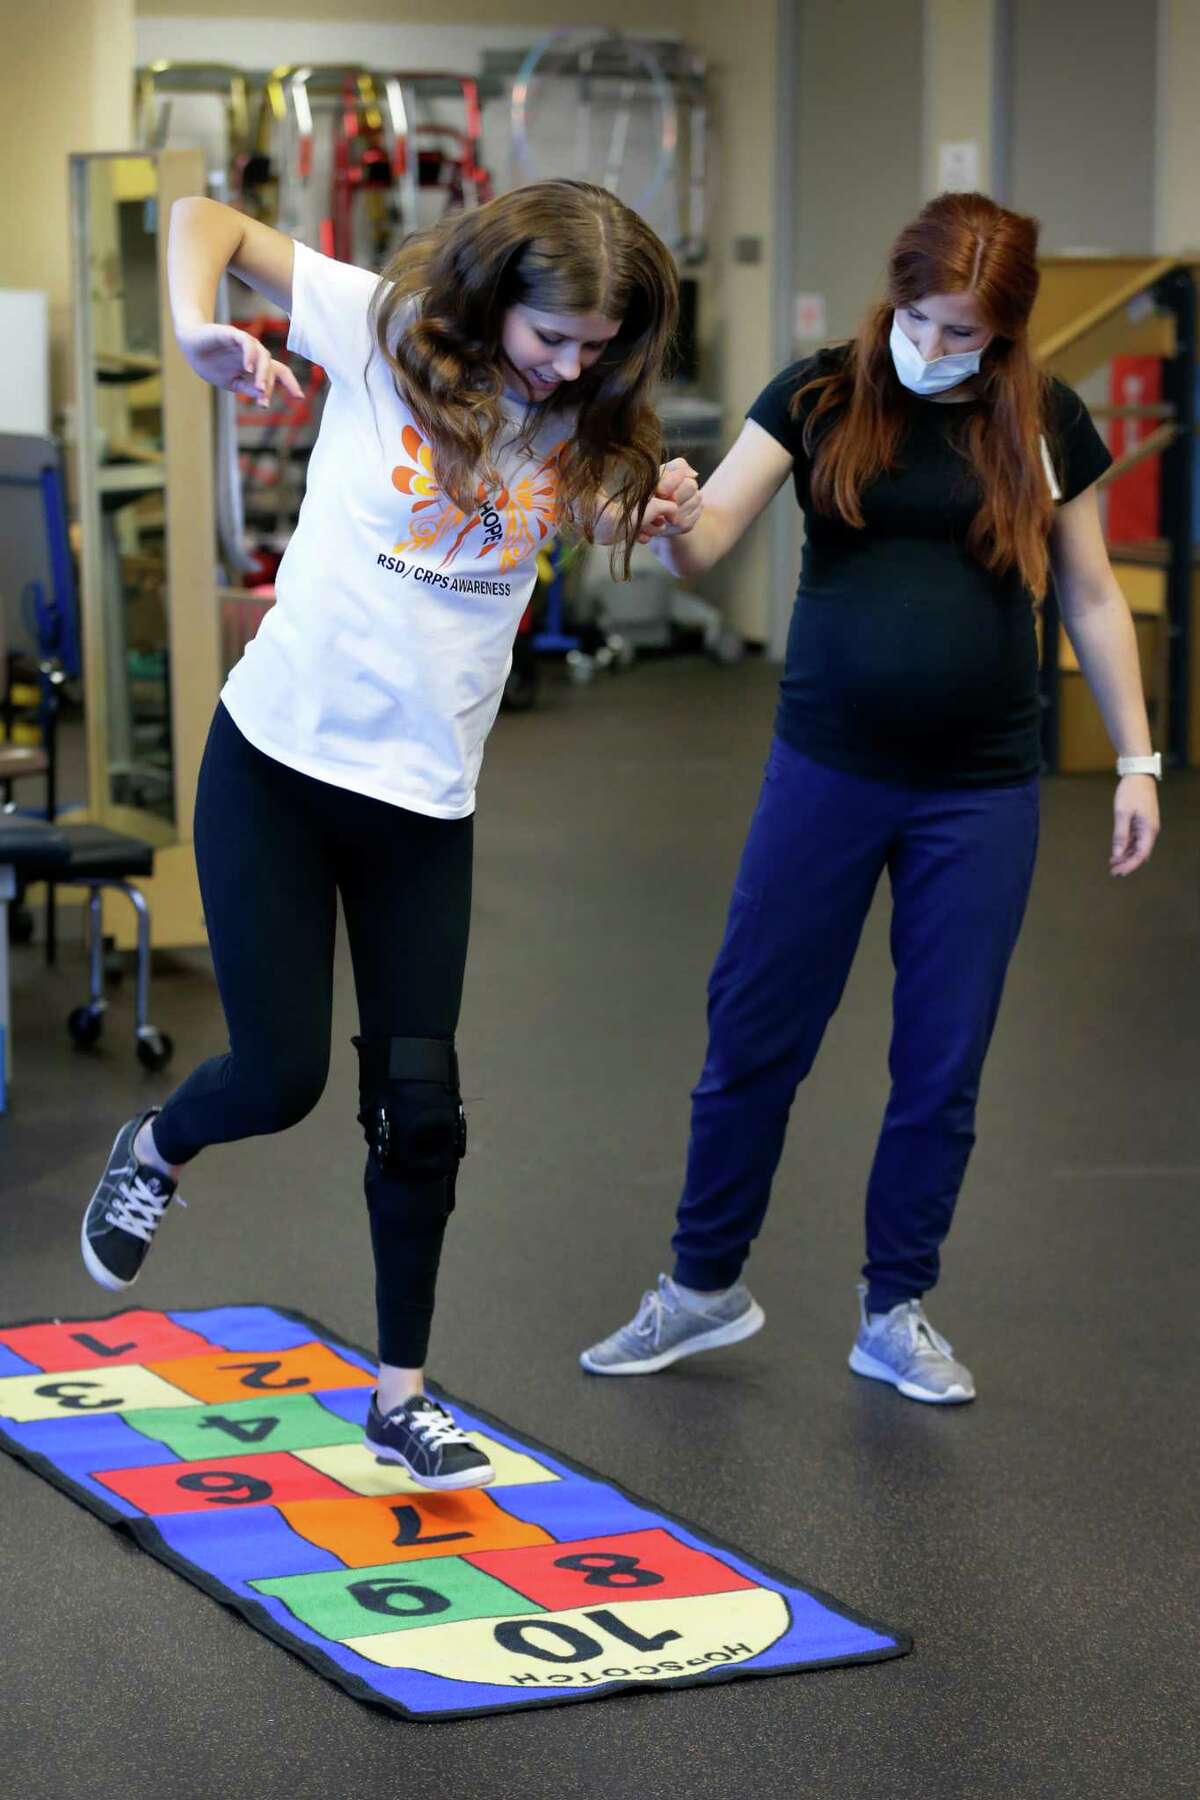 Kaitlin Thibodeaux, left, a 14 year old with chronic regional pain syndrome in her left ankle, gets some assistance as she jumps hop-scotch as she goes thru her physical therapy session with Katelyn Navarro, right, at TIRR Memorial Hermann Wednesday, Oct. 26, 2022 in The Woodlands, TX.